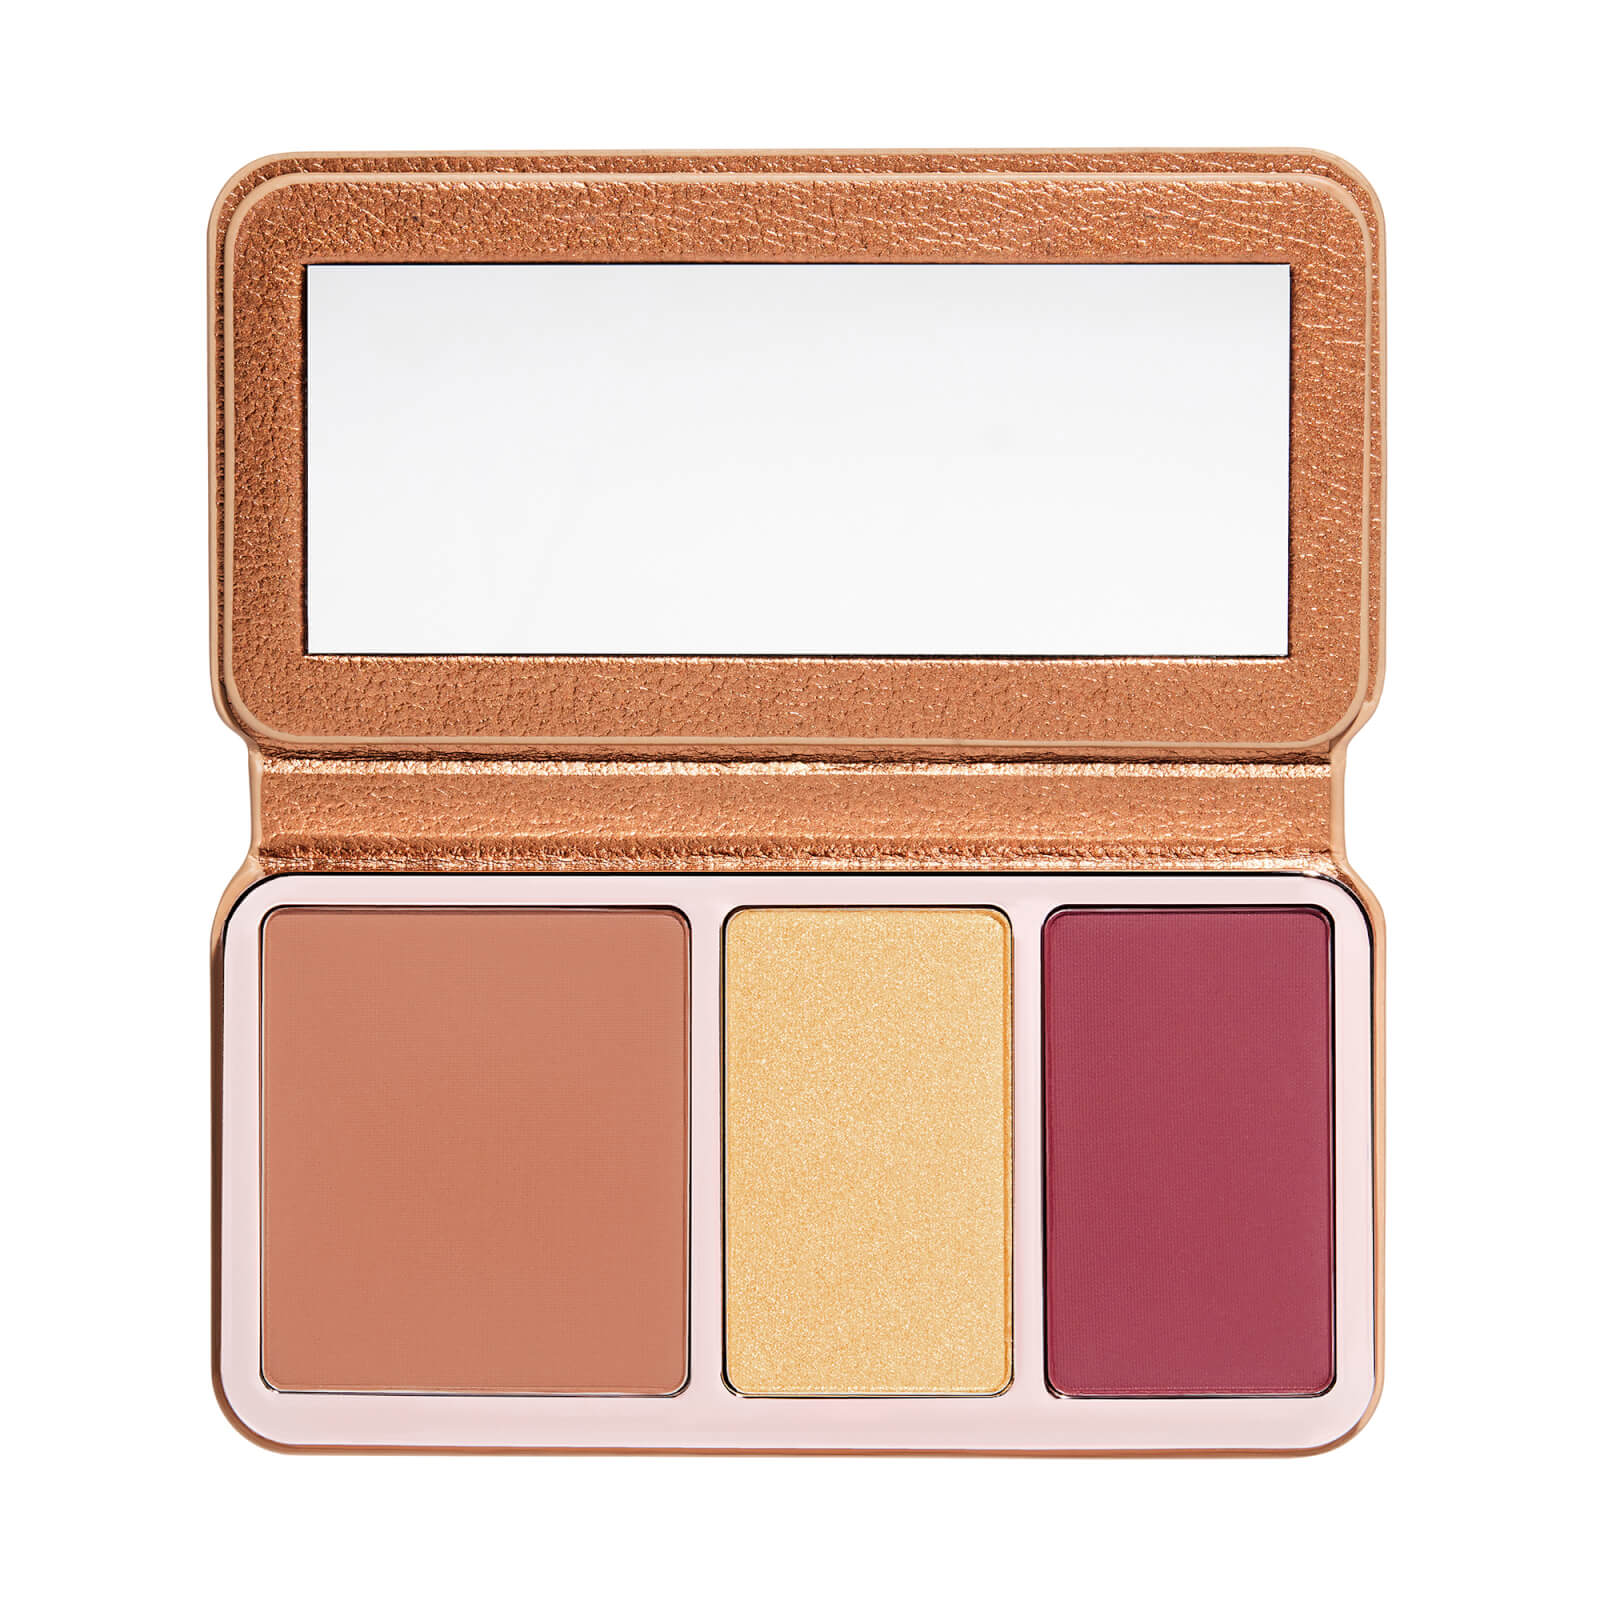 Image of Anastasia Beverly Hills Face Palette - Tropical Getaway